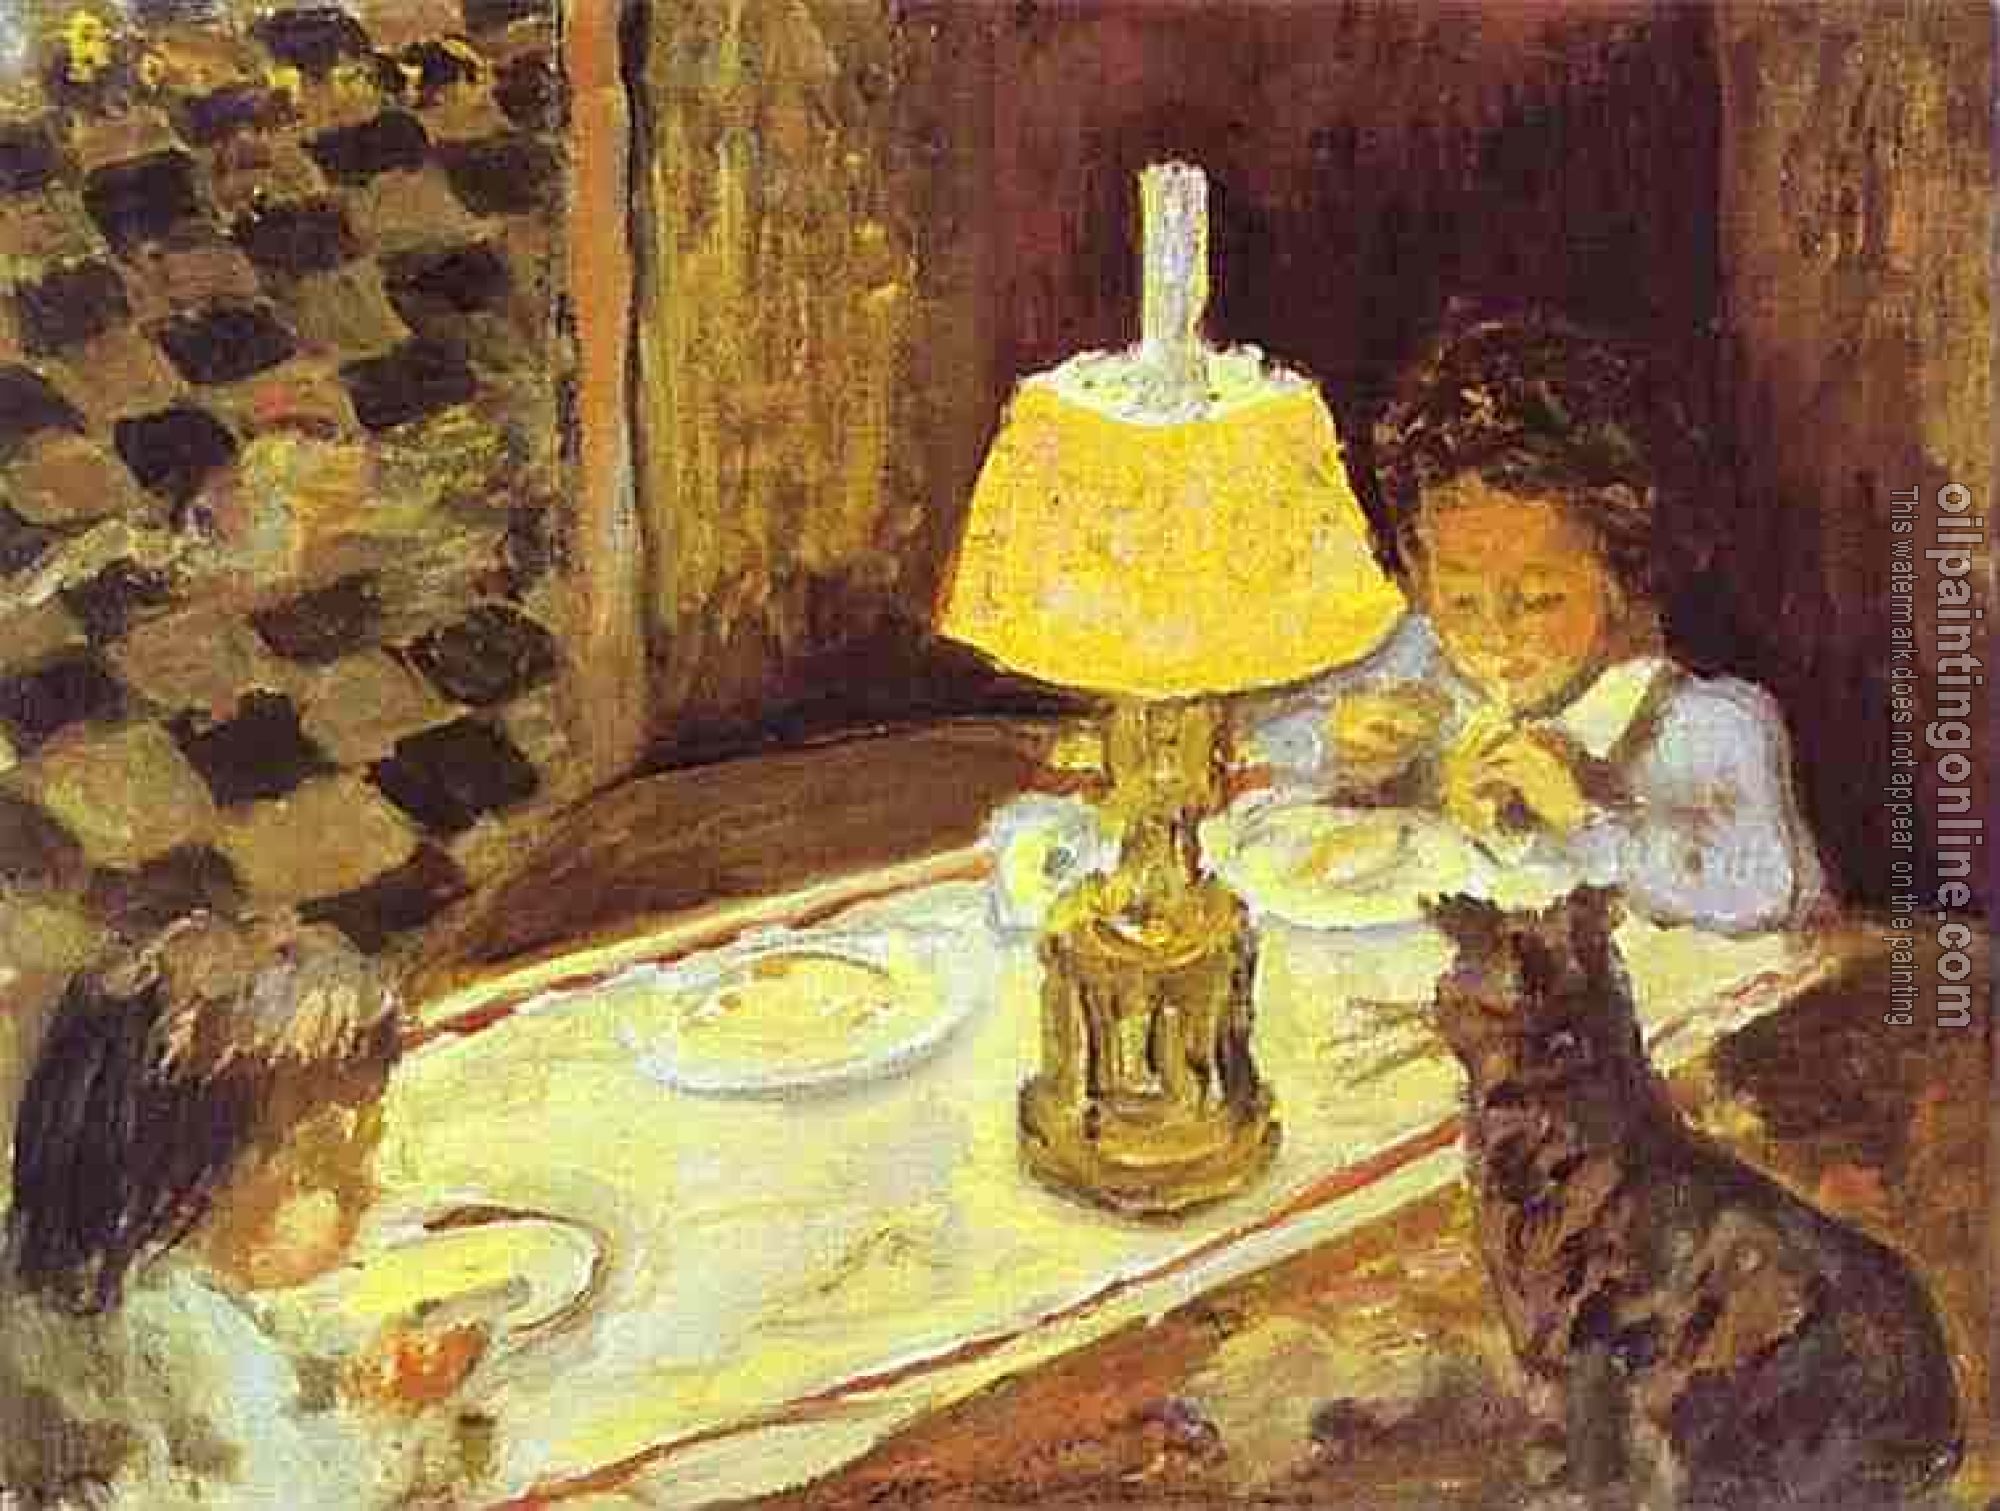 Pierre Bonnard - The Lunch of the Little Ones